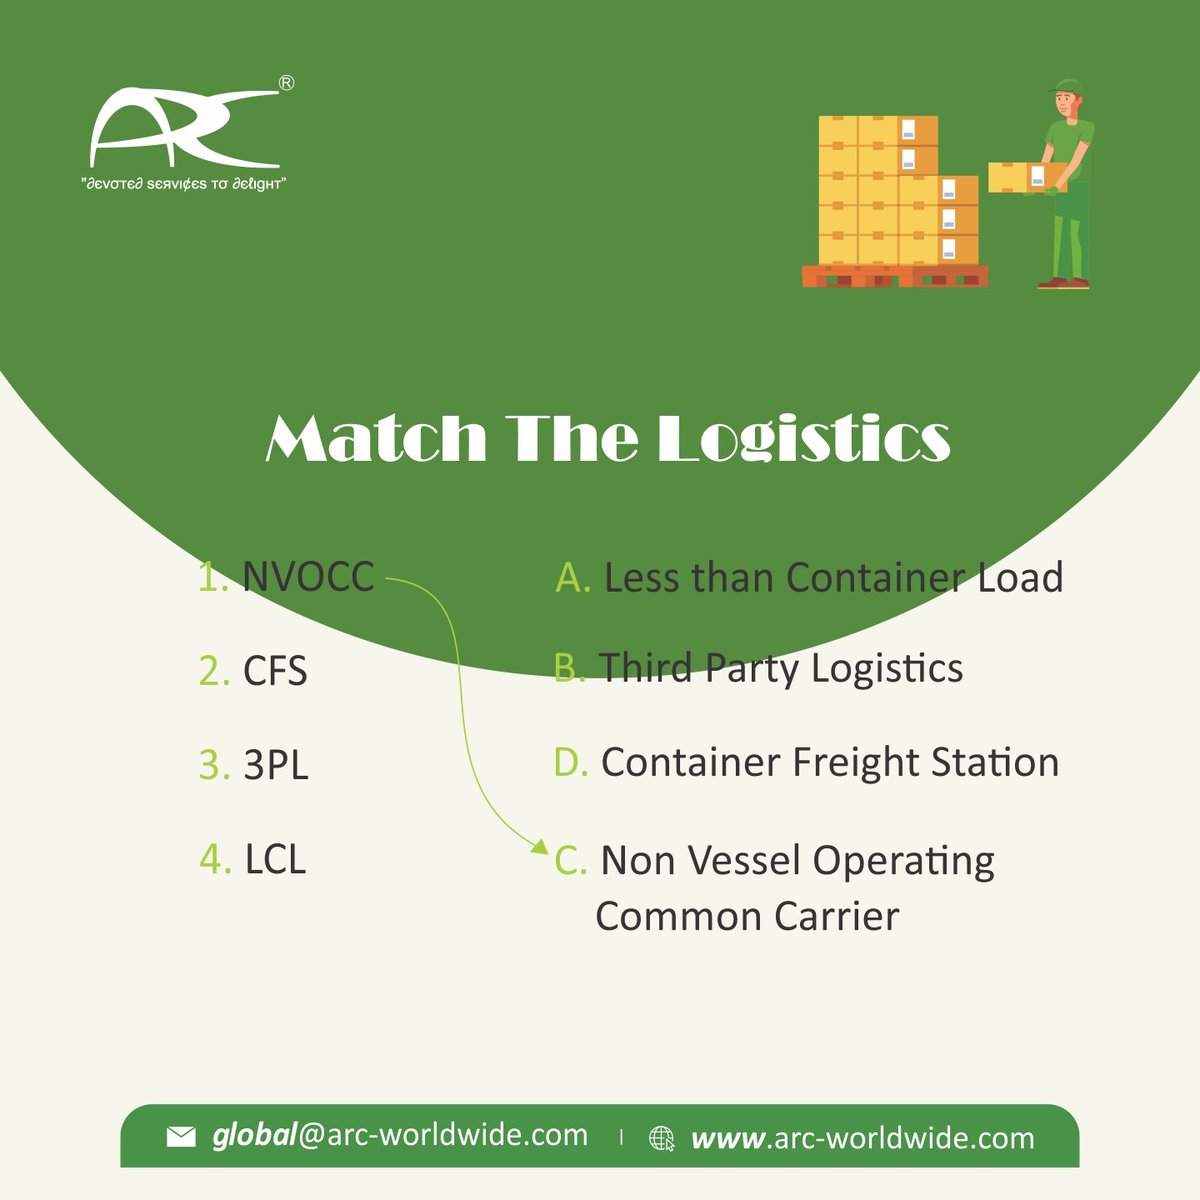 ❓Match The Logistics!
✏ Please Reply in Comments
🌎arc-worldwide.com
#seafreight #airfreight #freightforwarders #logistics #shipping #cargo #MatchTheLogistics #trending #doortodoordelivery #love #viralpost #viral #popular #followmenow #LikeAndShare #likesforlike #foryou